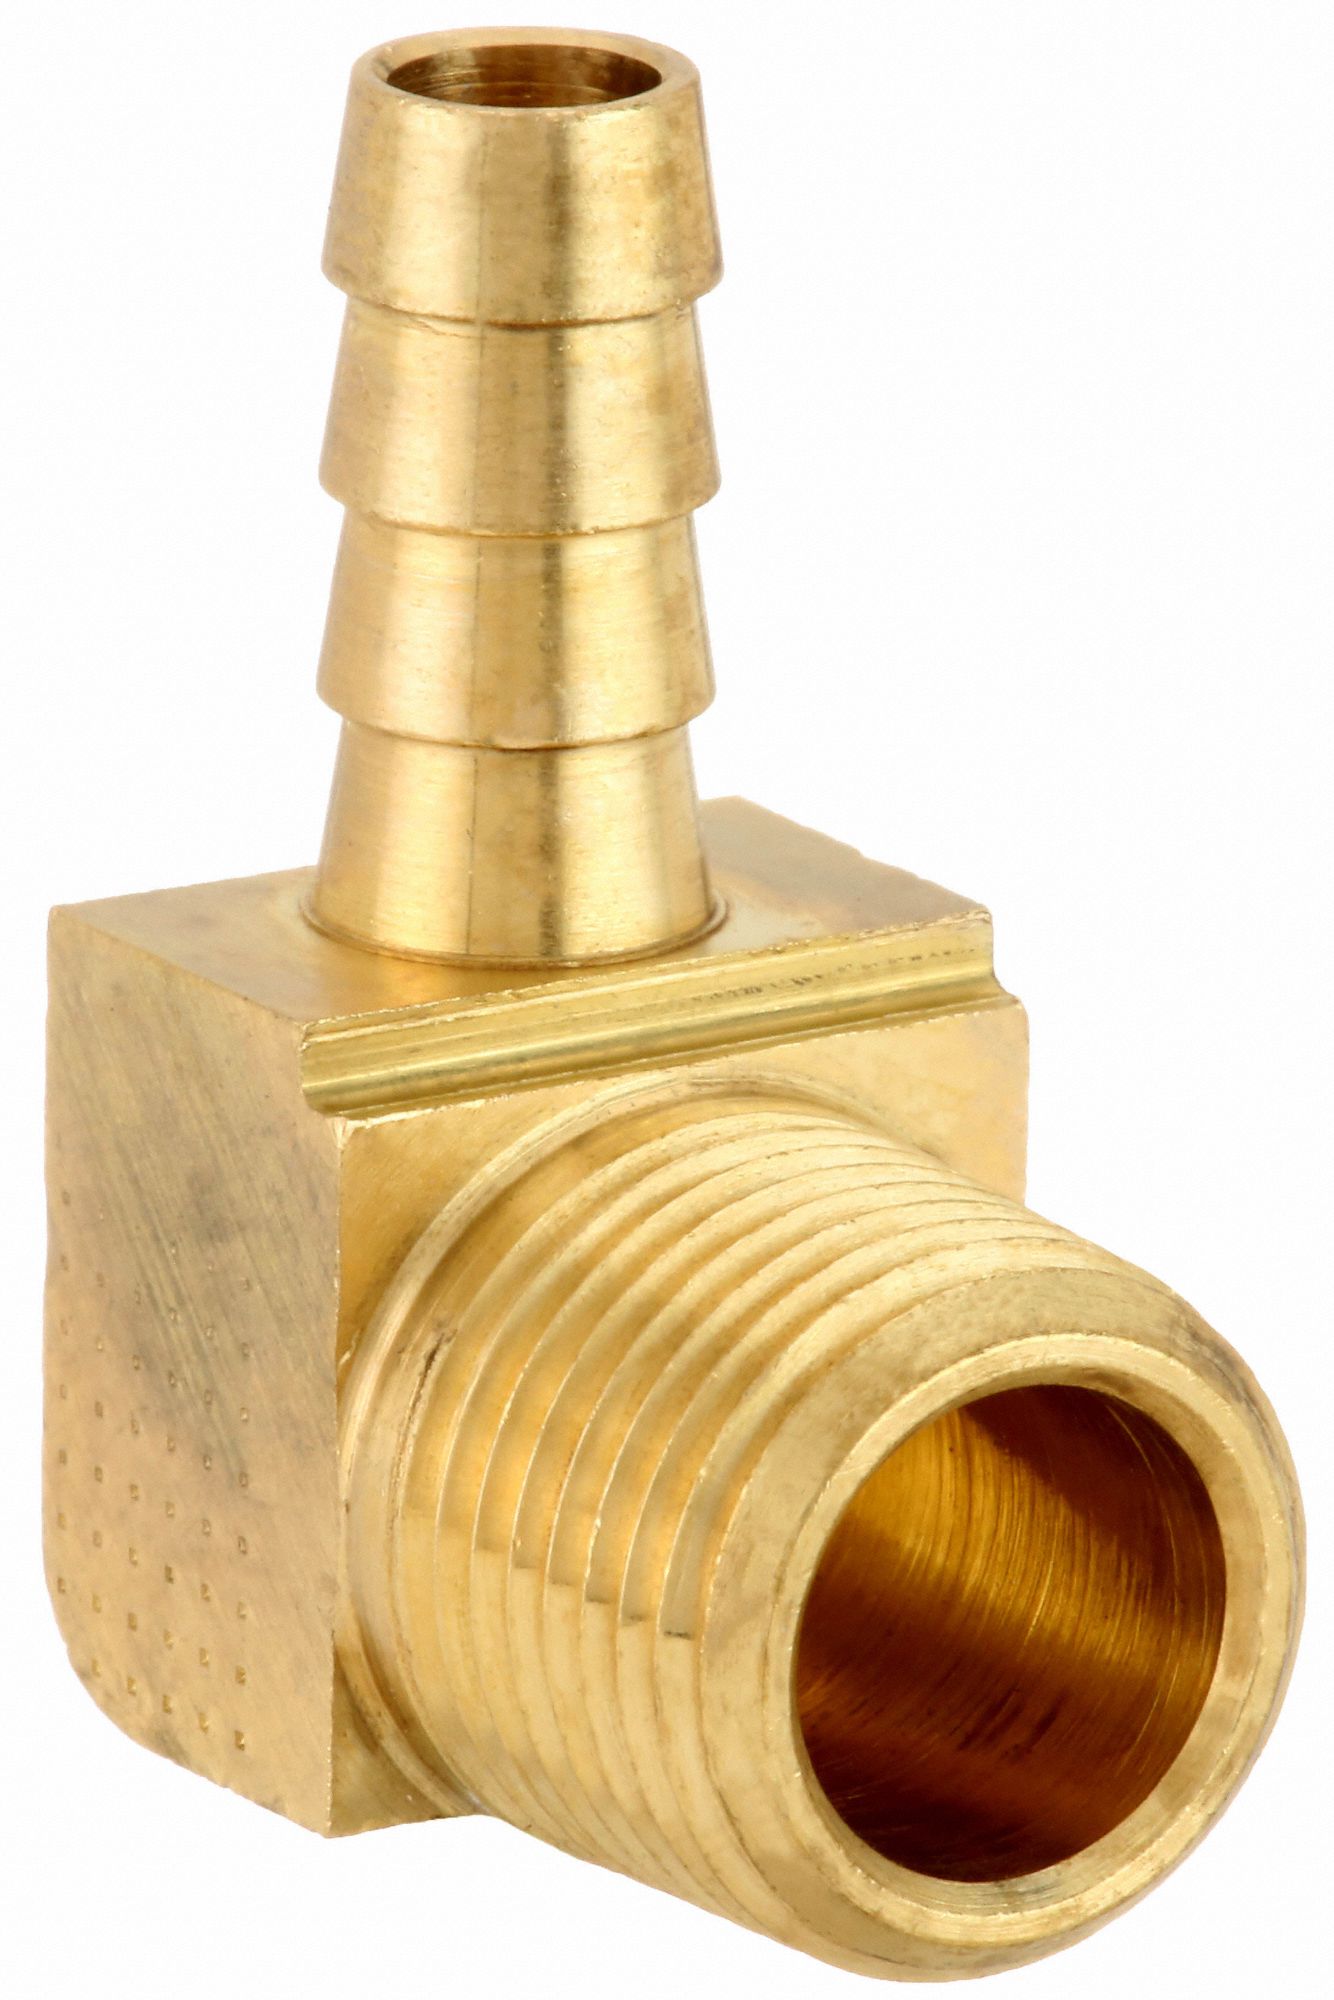 Parker Barbed Hose Fitting For 516 In Hose Id Hose Barb X Npt 516 In X 38 In Fitting 